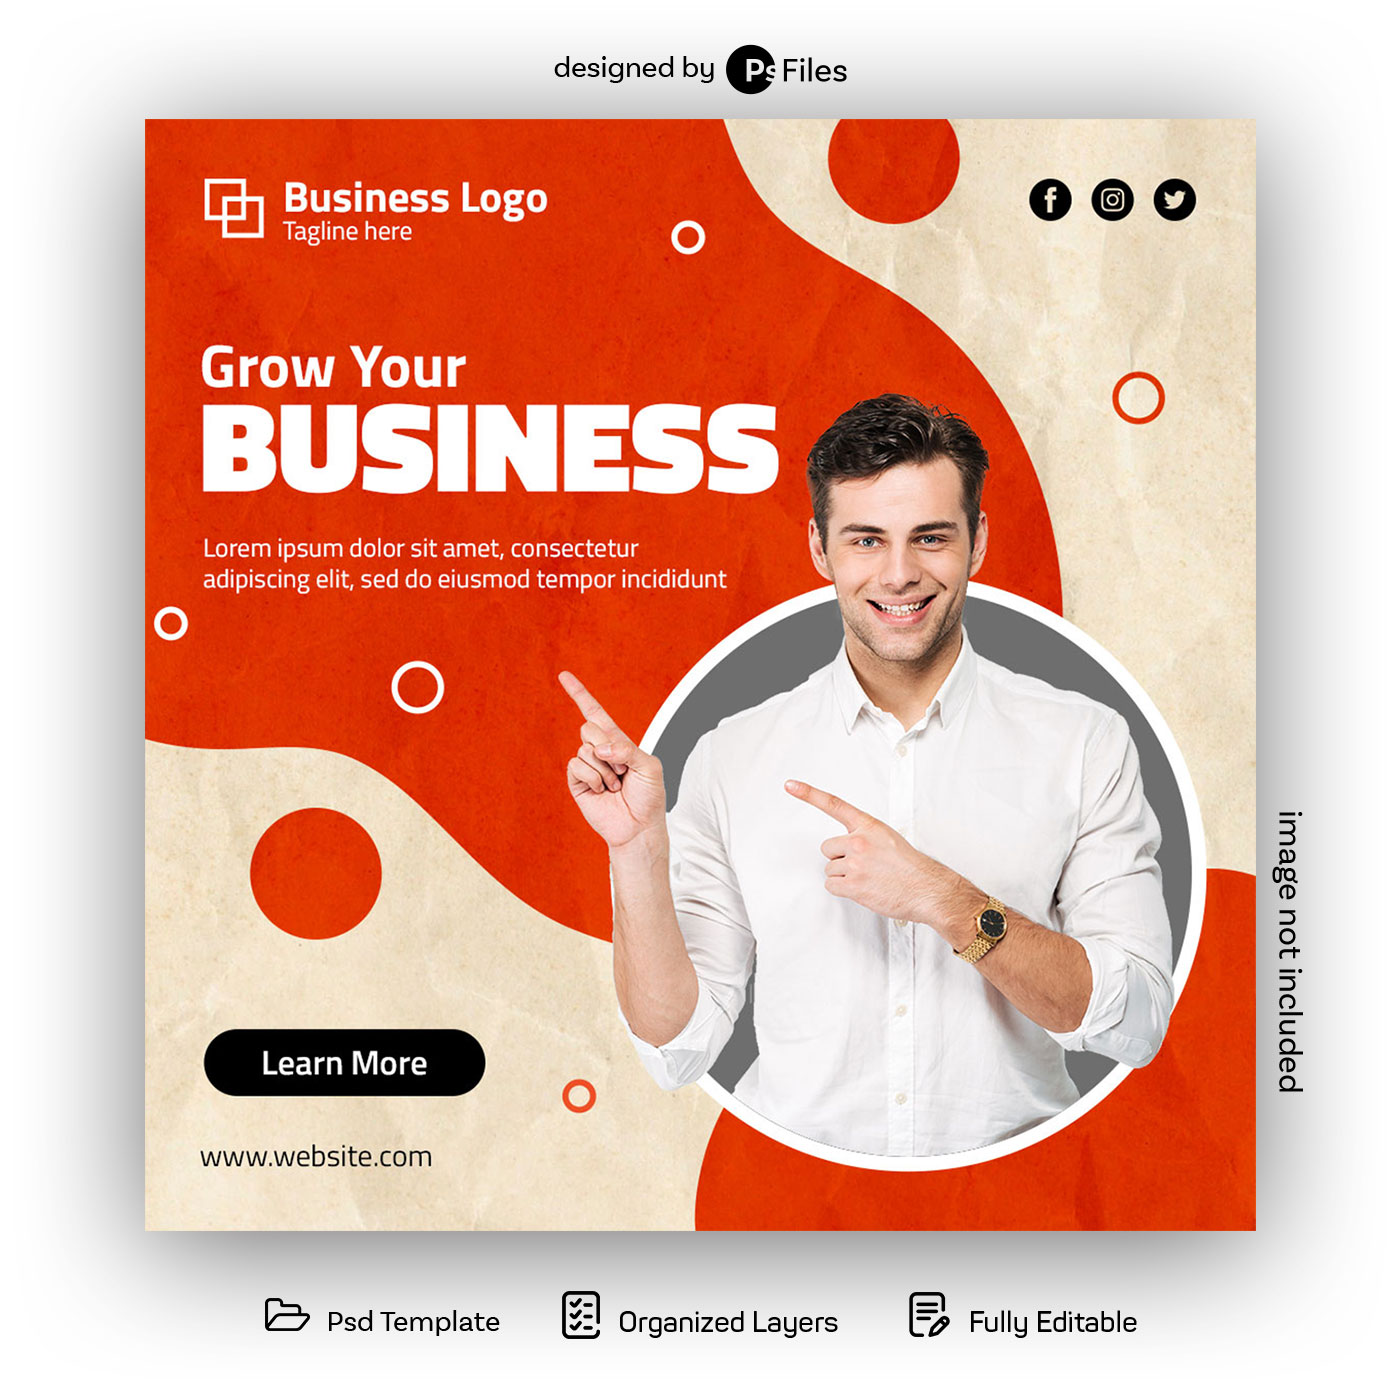 Creative Abstract Shaped New Style Free Instagram Post Design PSD Template for Grow Your Business